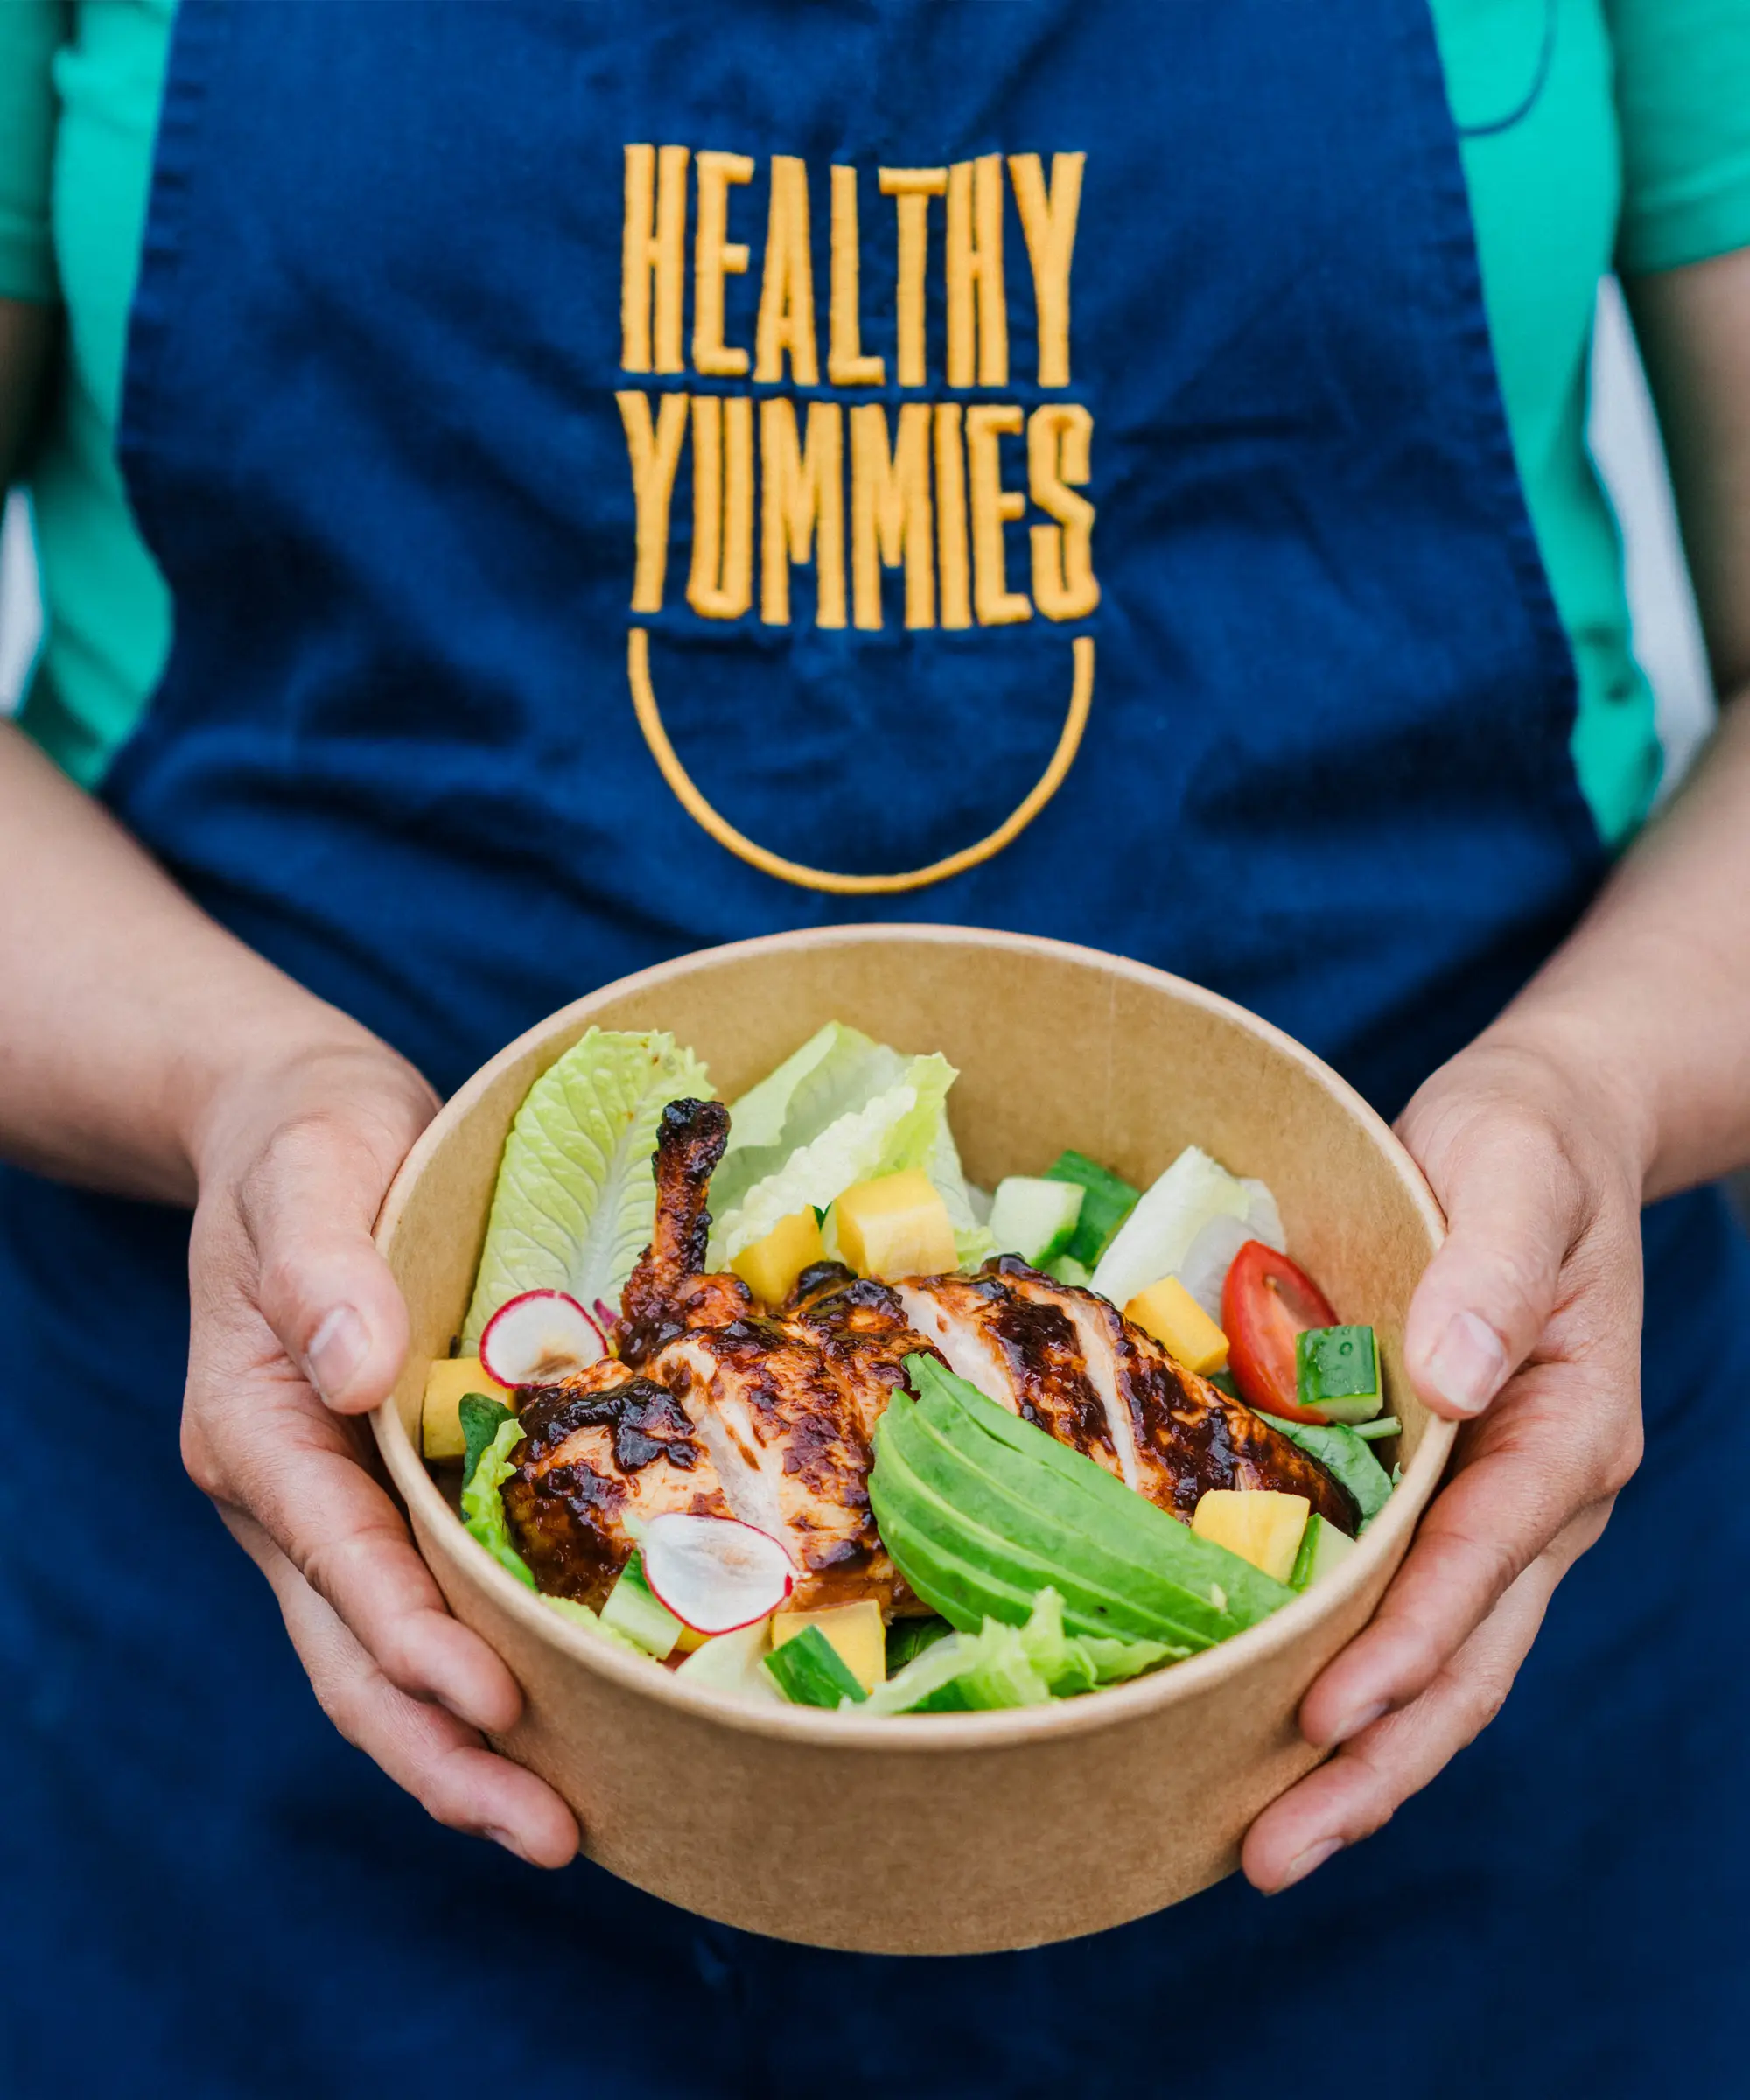 A Yummies team member holding a bowl of chicken salad (photograph).